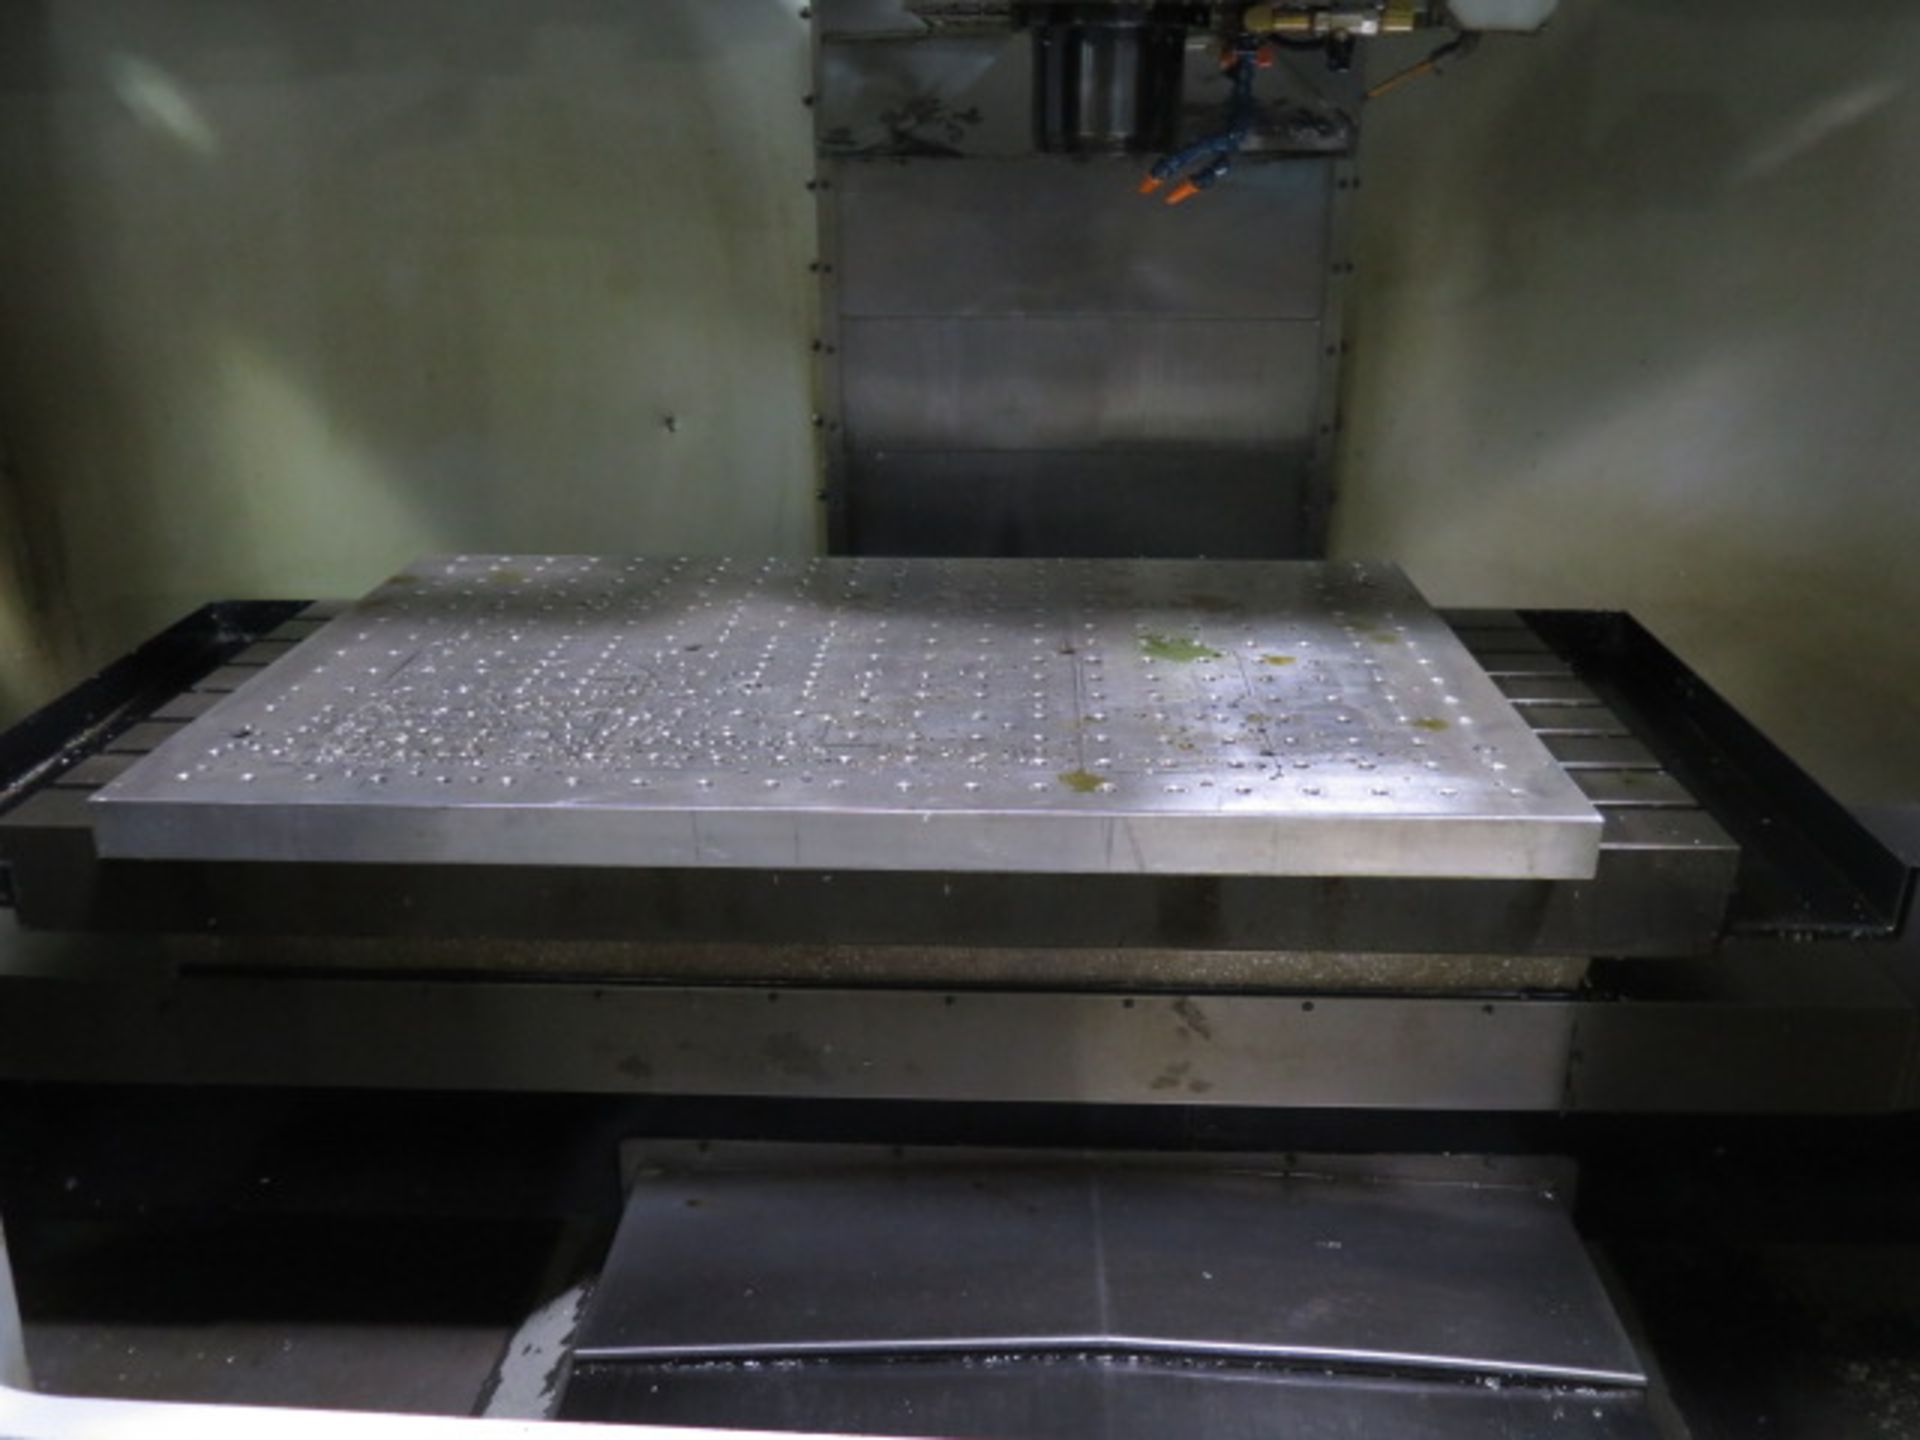 2006 Haas VF-3SSYT 4-Axis CNC VMC s/n 46514 w/ Haas Controls, Hand Wheel, 24Station ATC, SOLD AS IS - Image 5 of 18